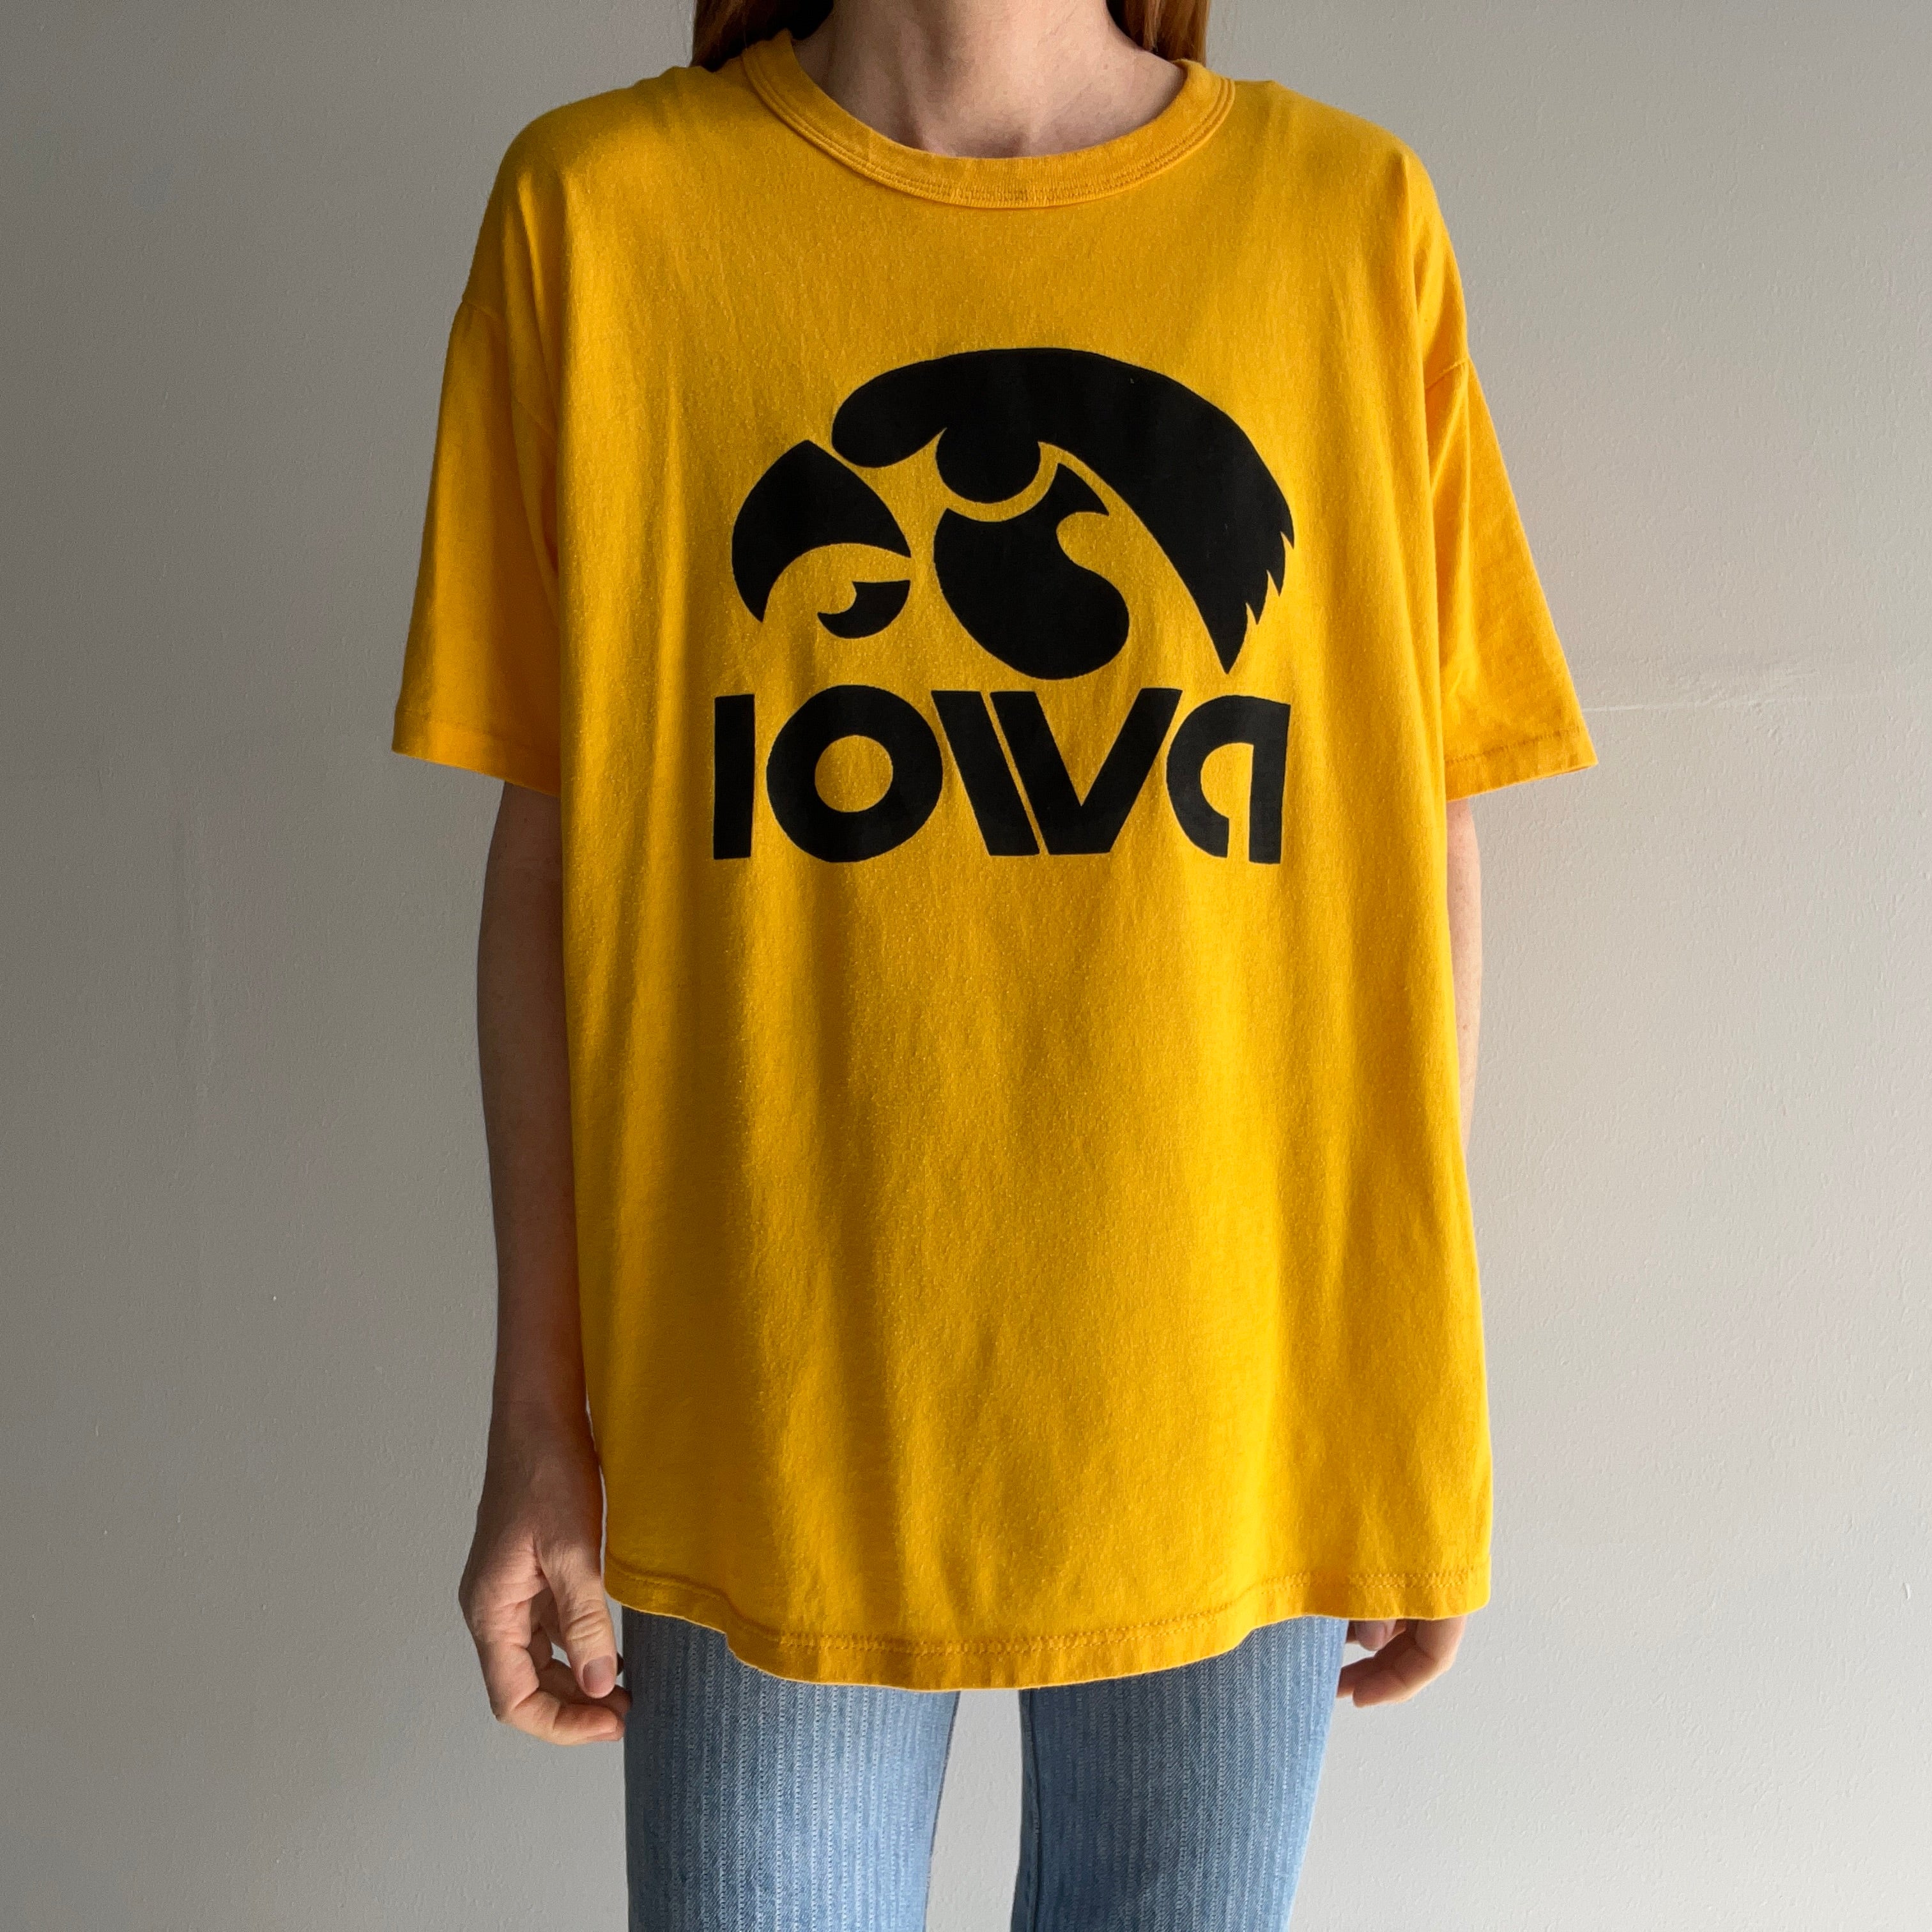 1990s Iowa T-Shirt by Russell